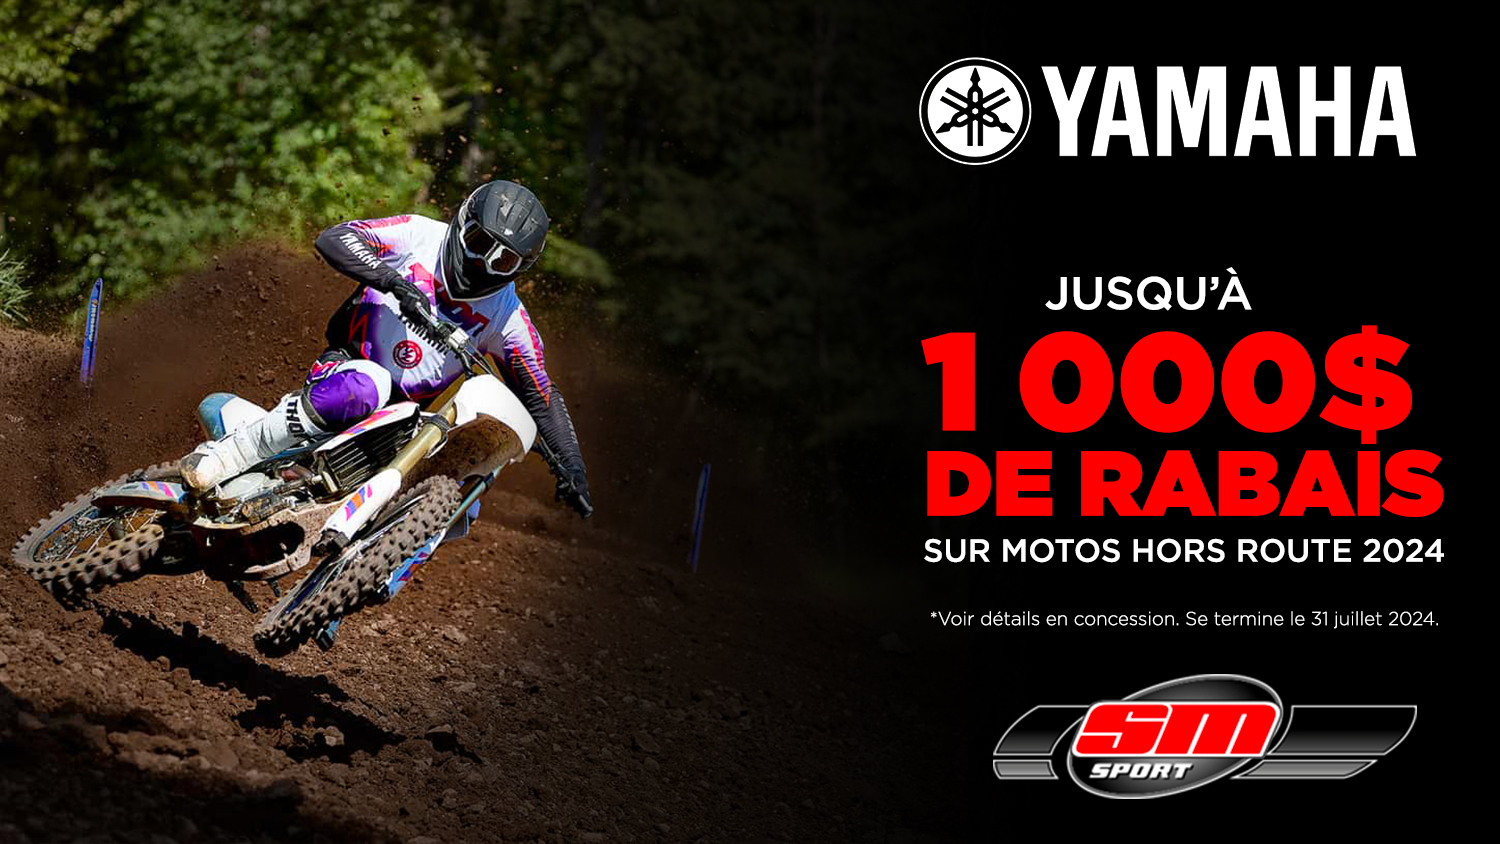 Promotions Yamaha | Motos Hors Route